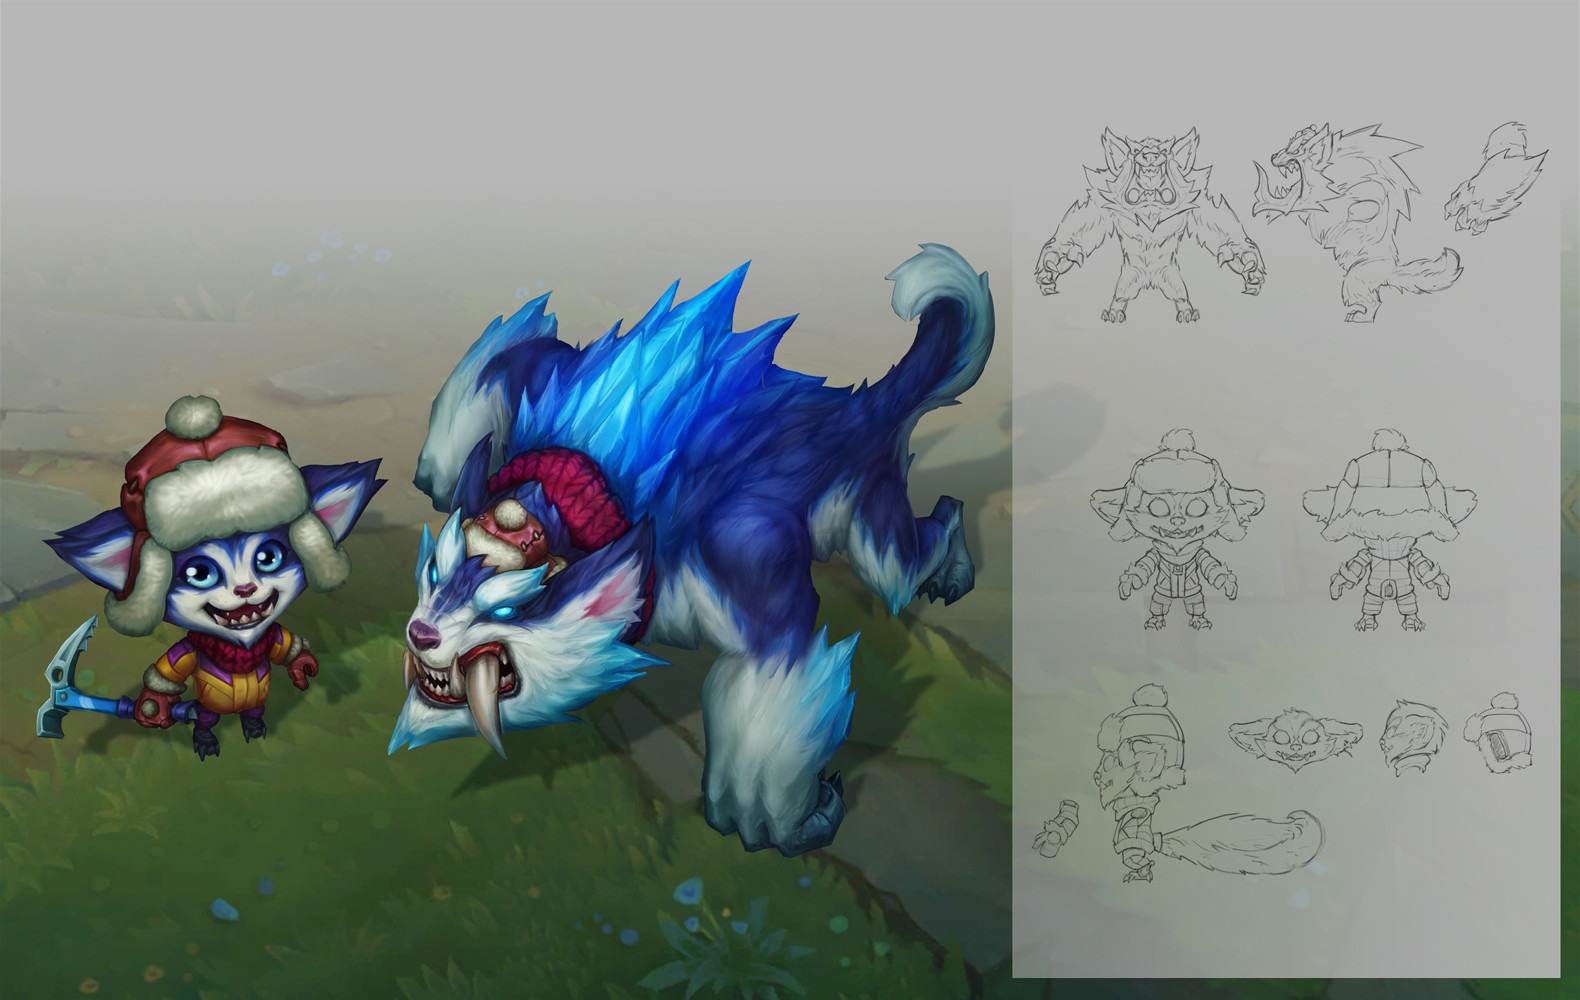 Snow Down' Skin for the Champion 'Gnar' in League of Legends...